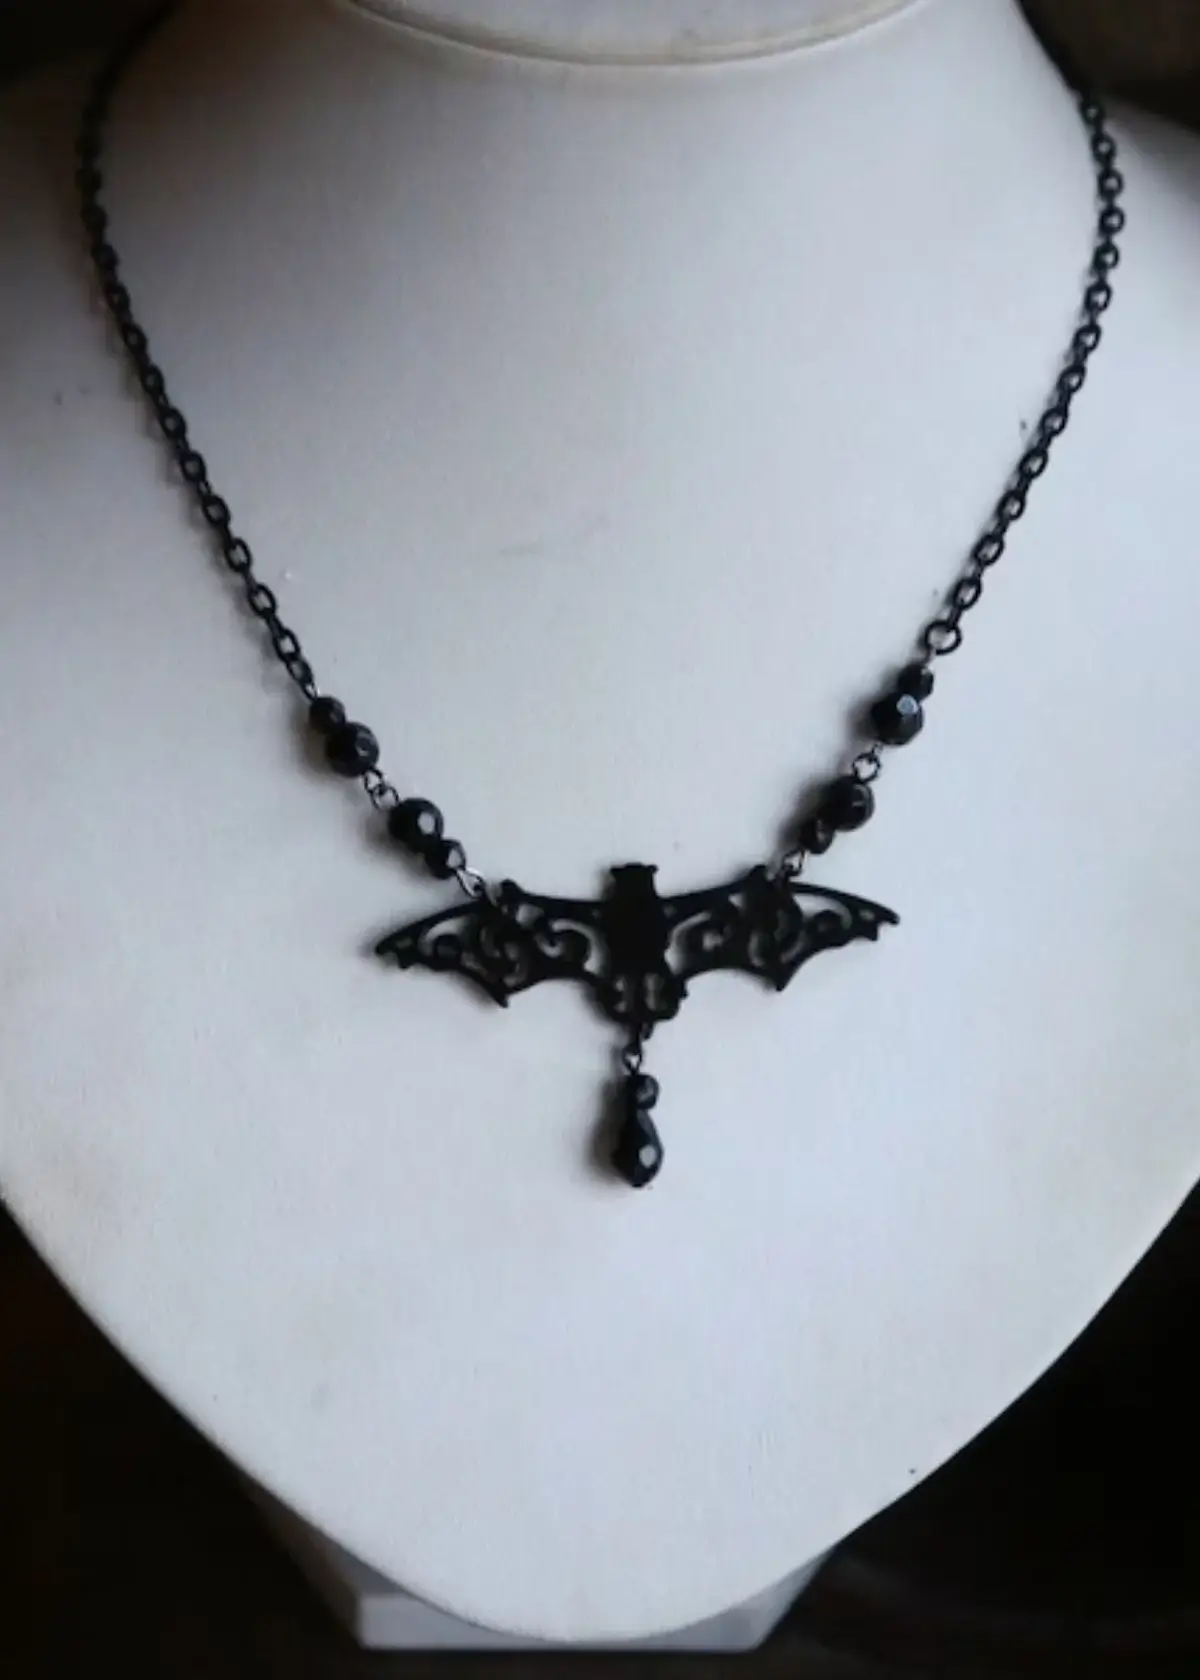 How to choose the right bat necklace?